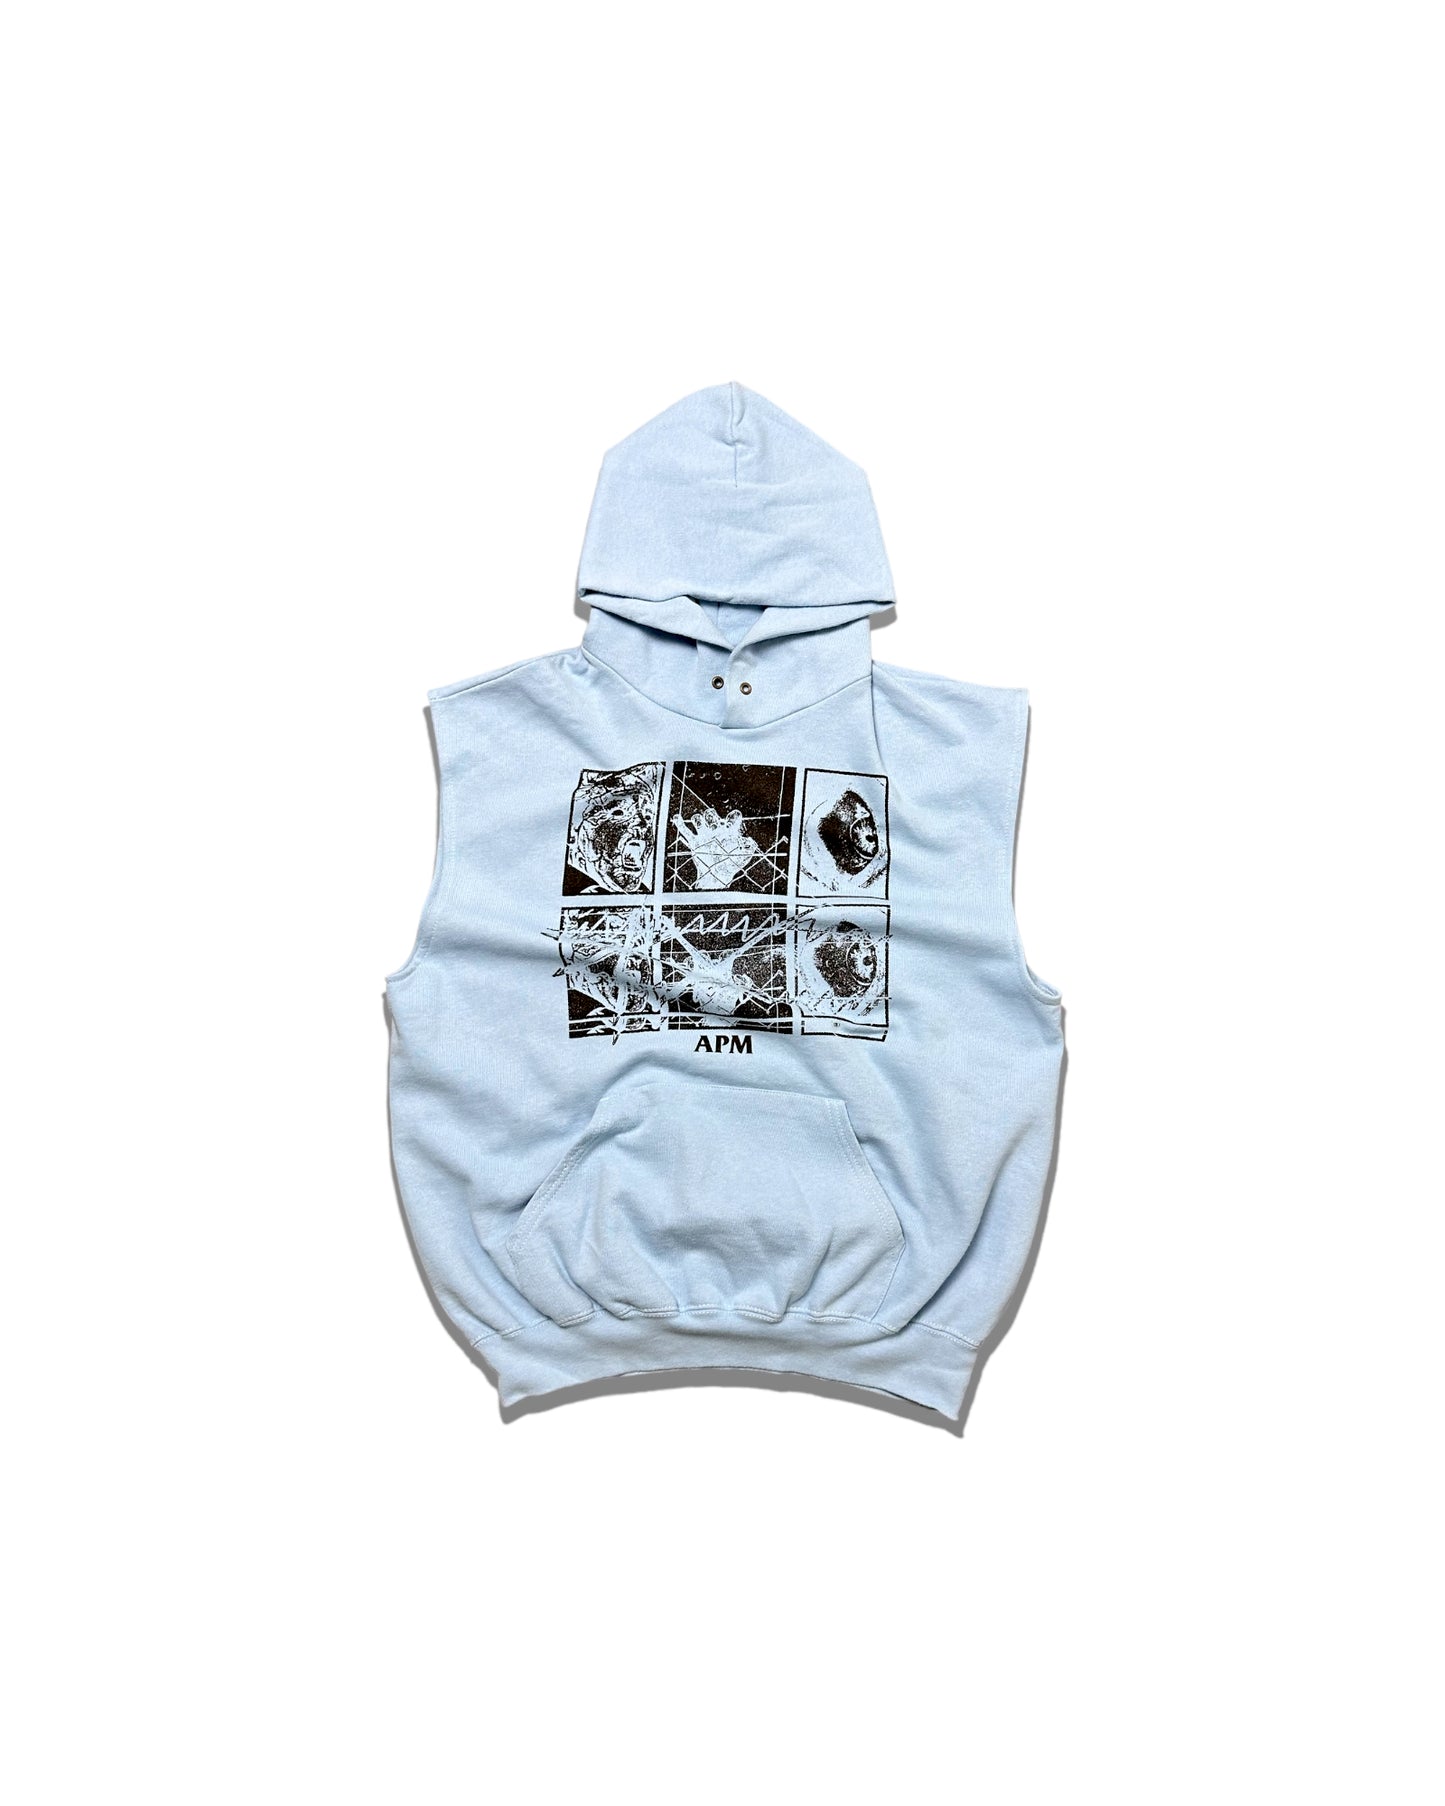 LIFE IN A CAGE SLEEVELESS HOODIE - BLUE - PRE-ORDER